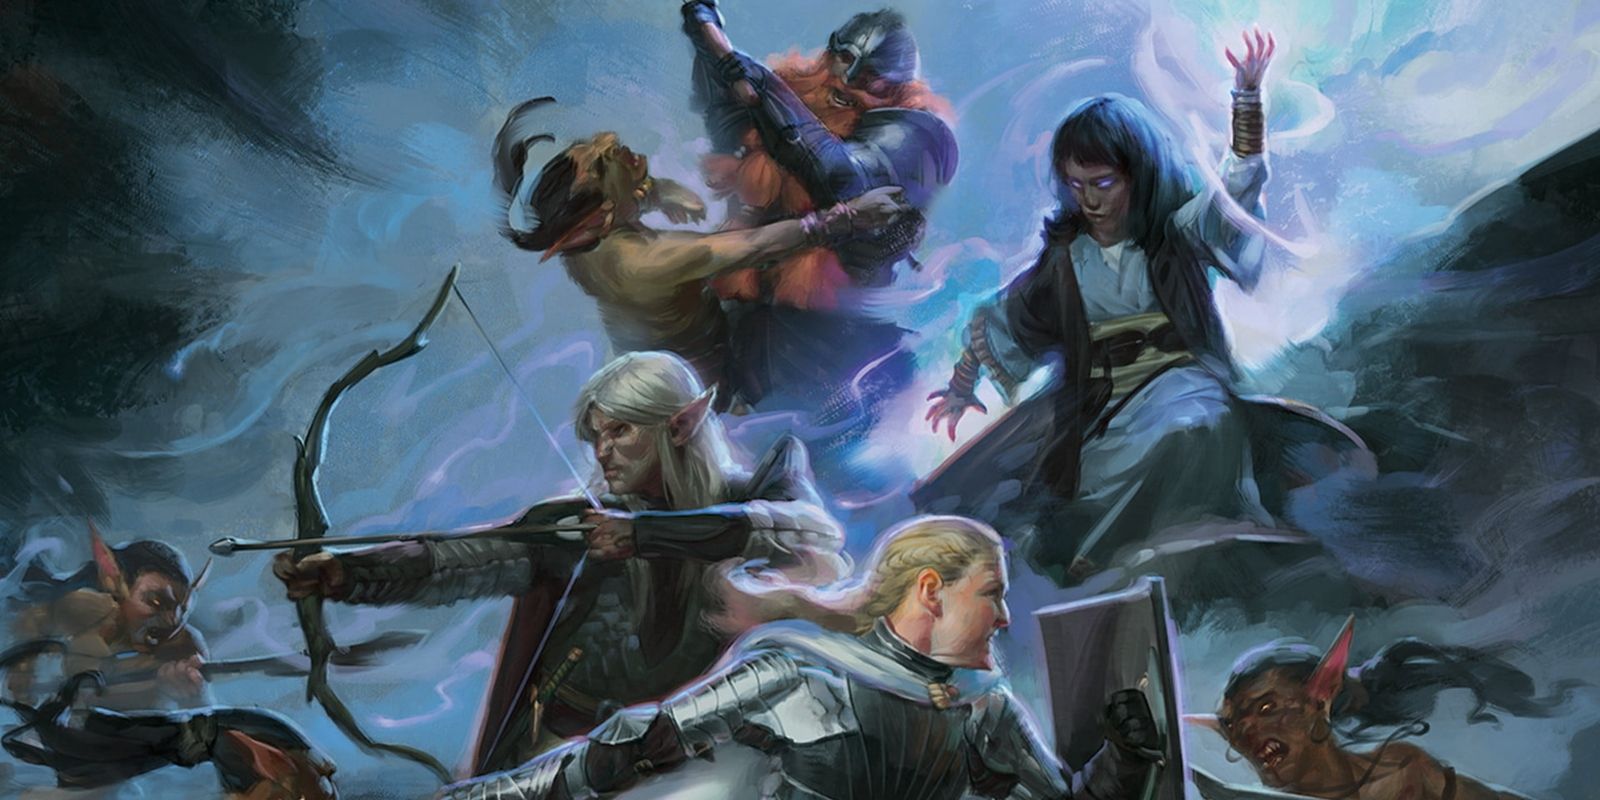 dungeons-dragons-dnd-party-combat-(1).jpg